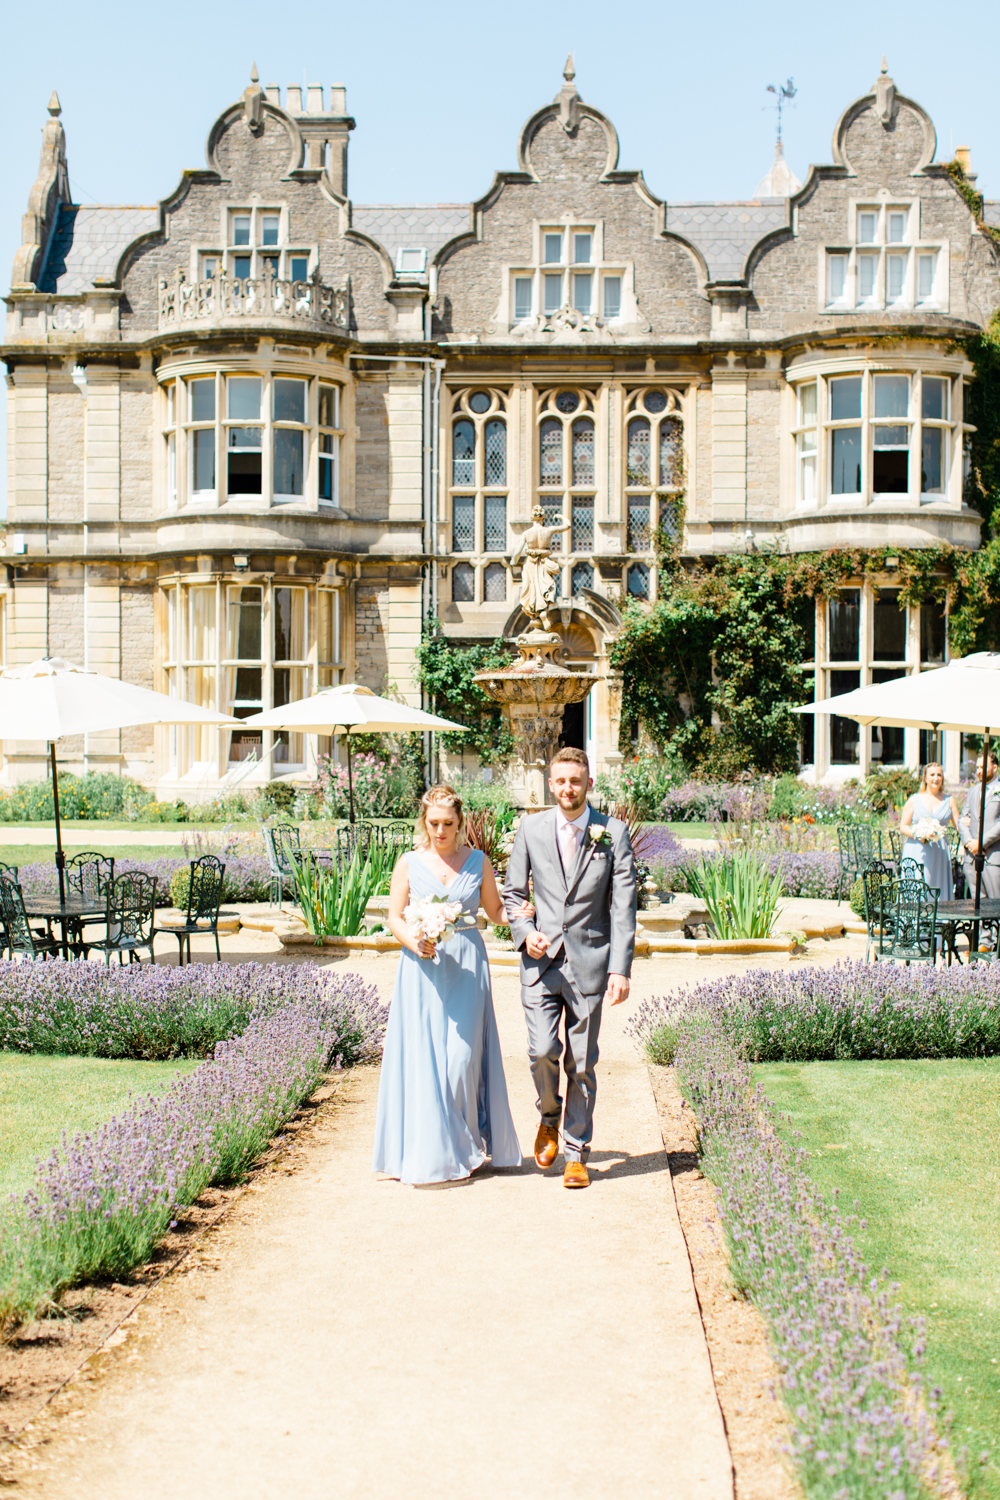 The Magical Clevedon Hall Mansion stands in the backdrop of the wedding party